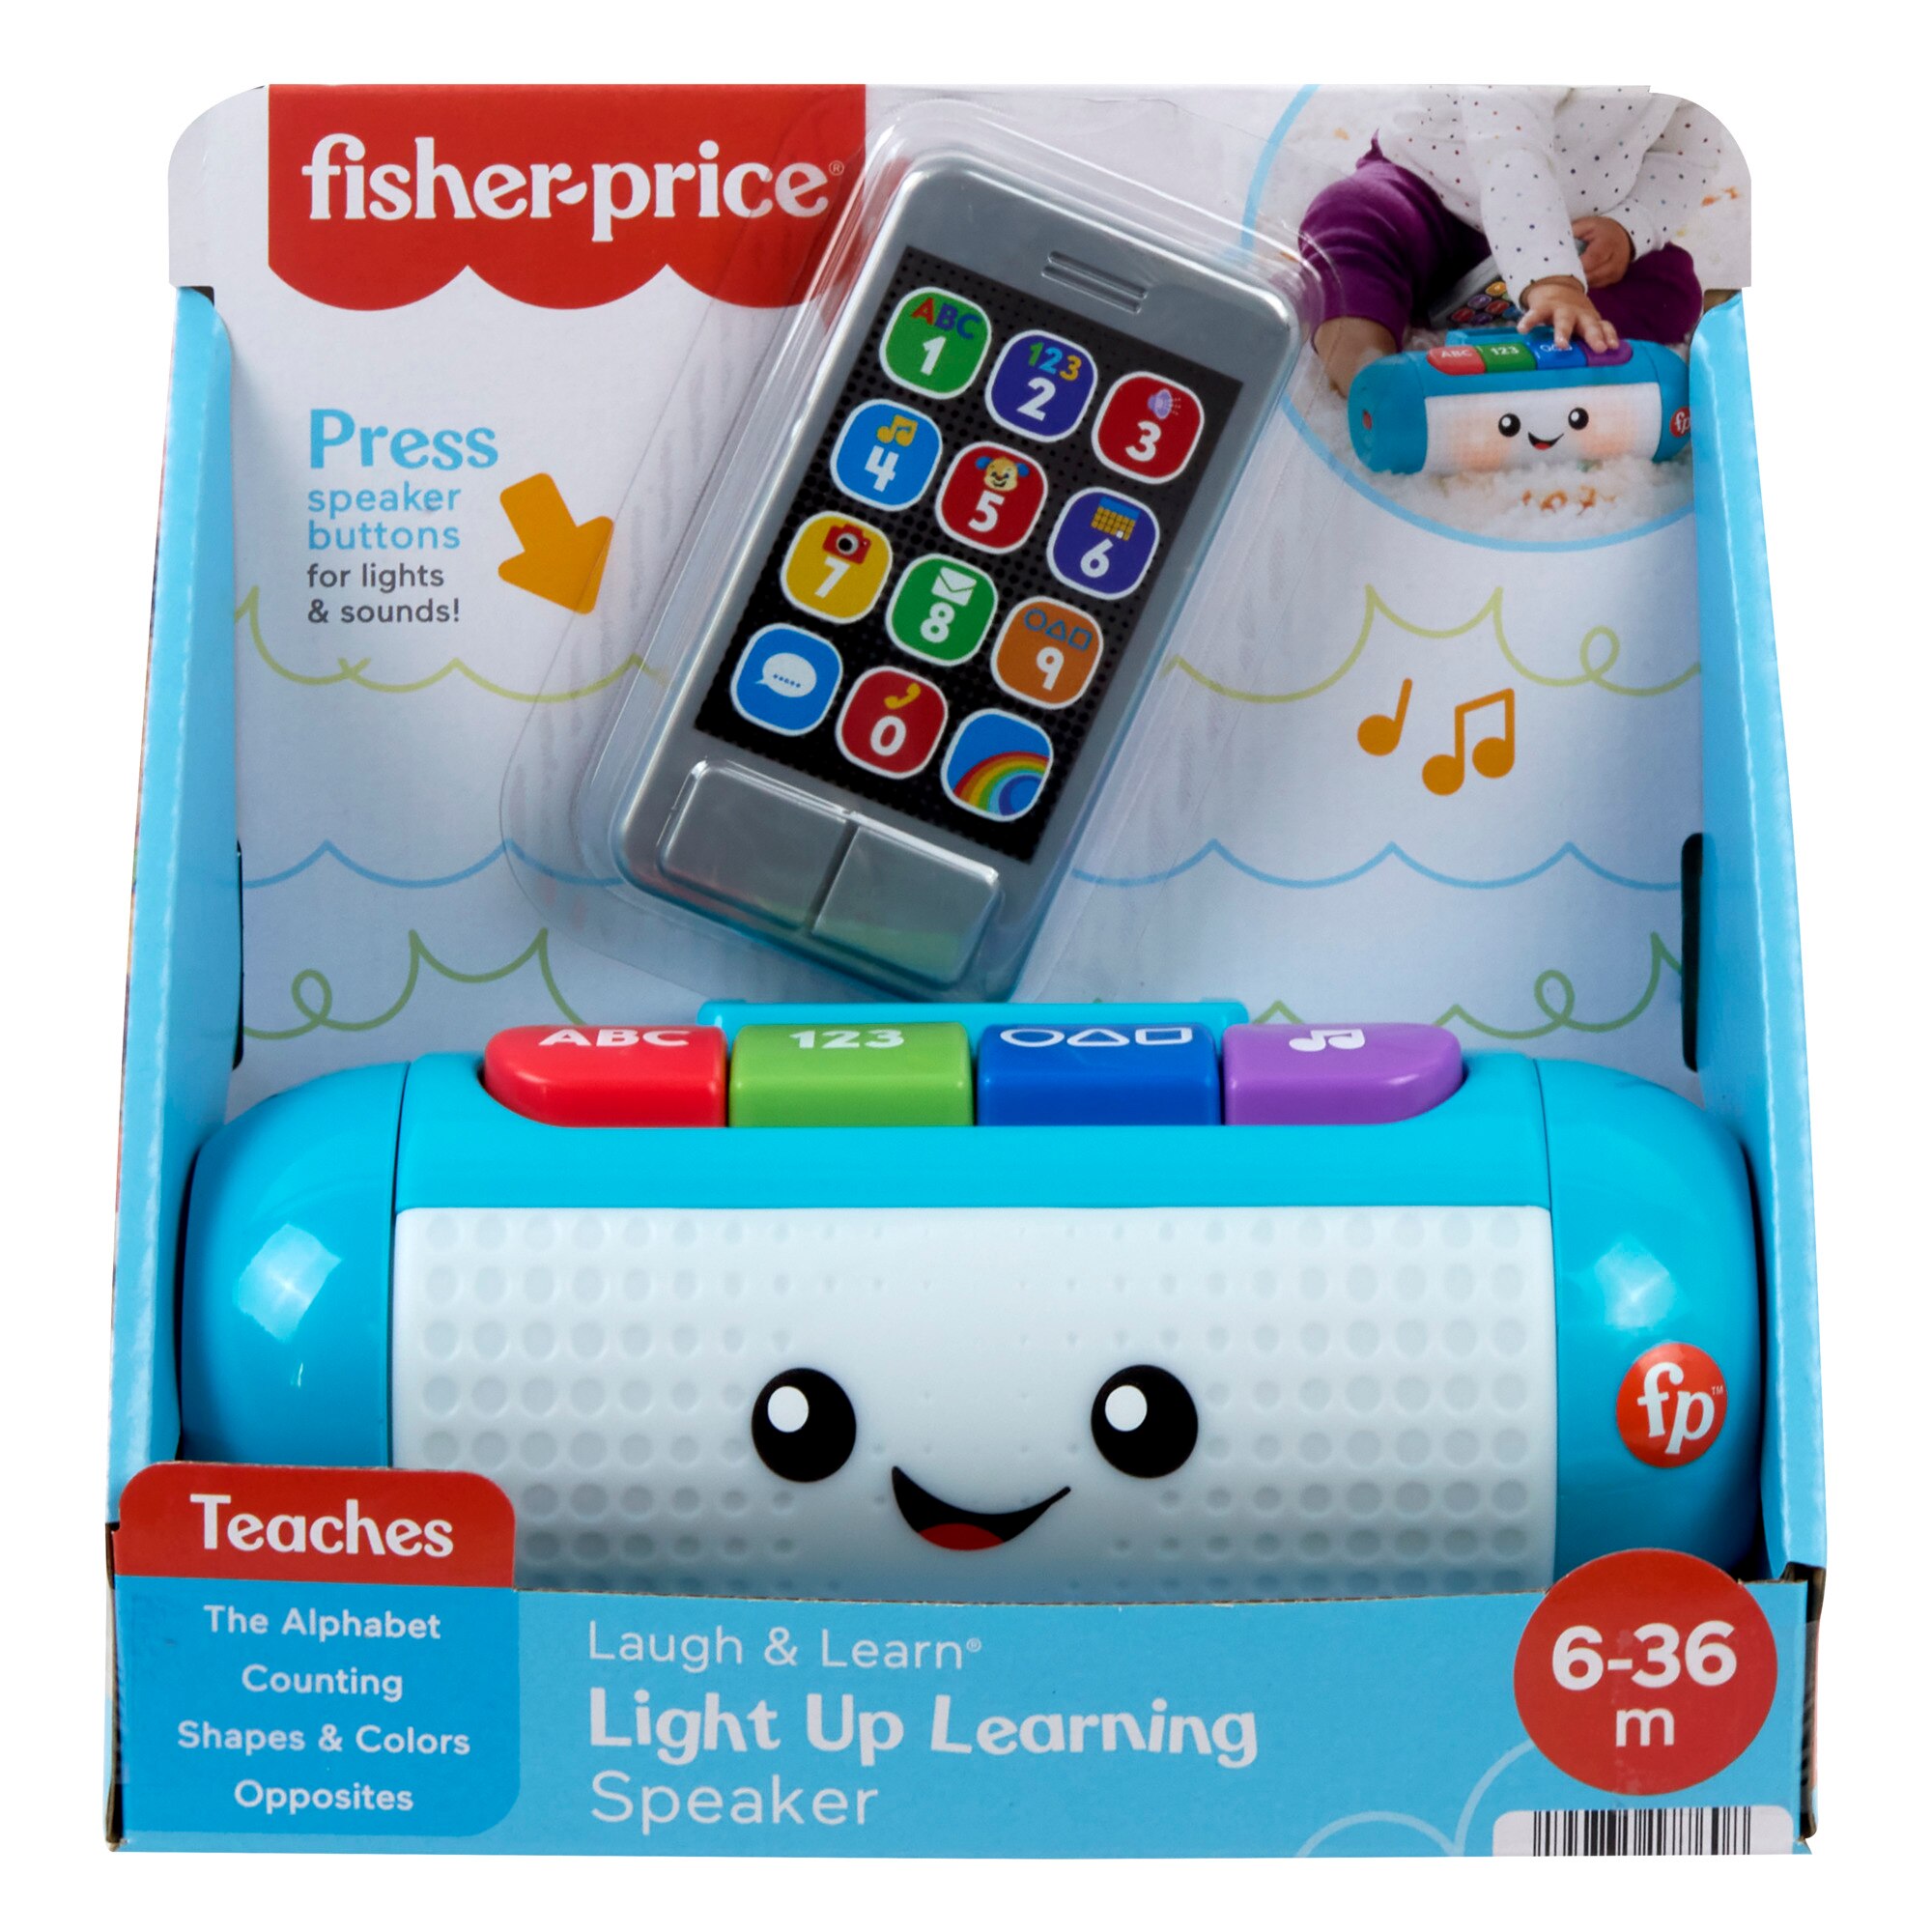 Fisher Price Laugh and Learn Toy Reviews